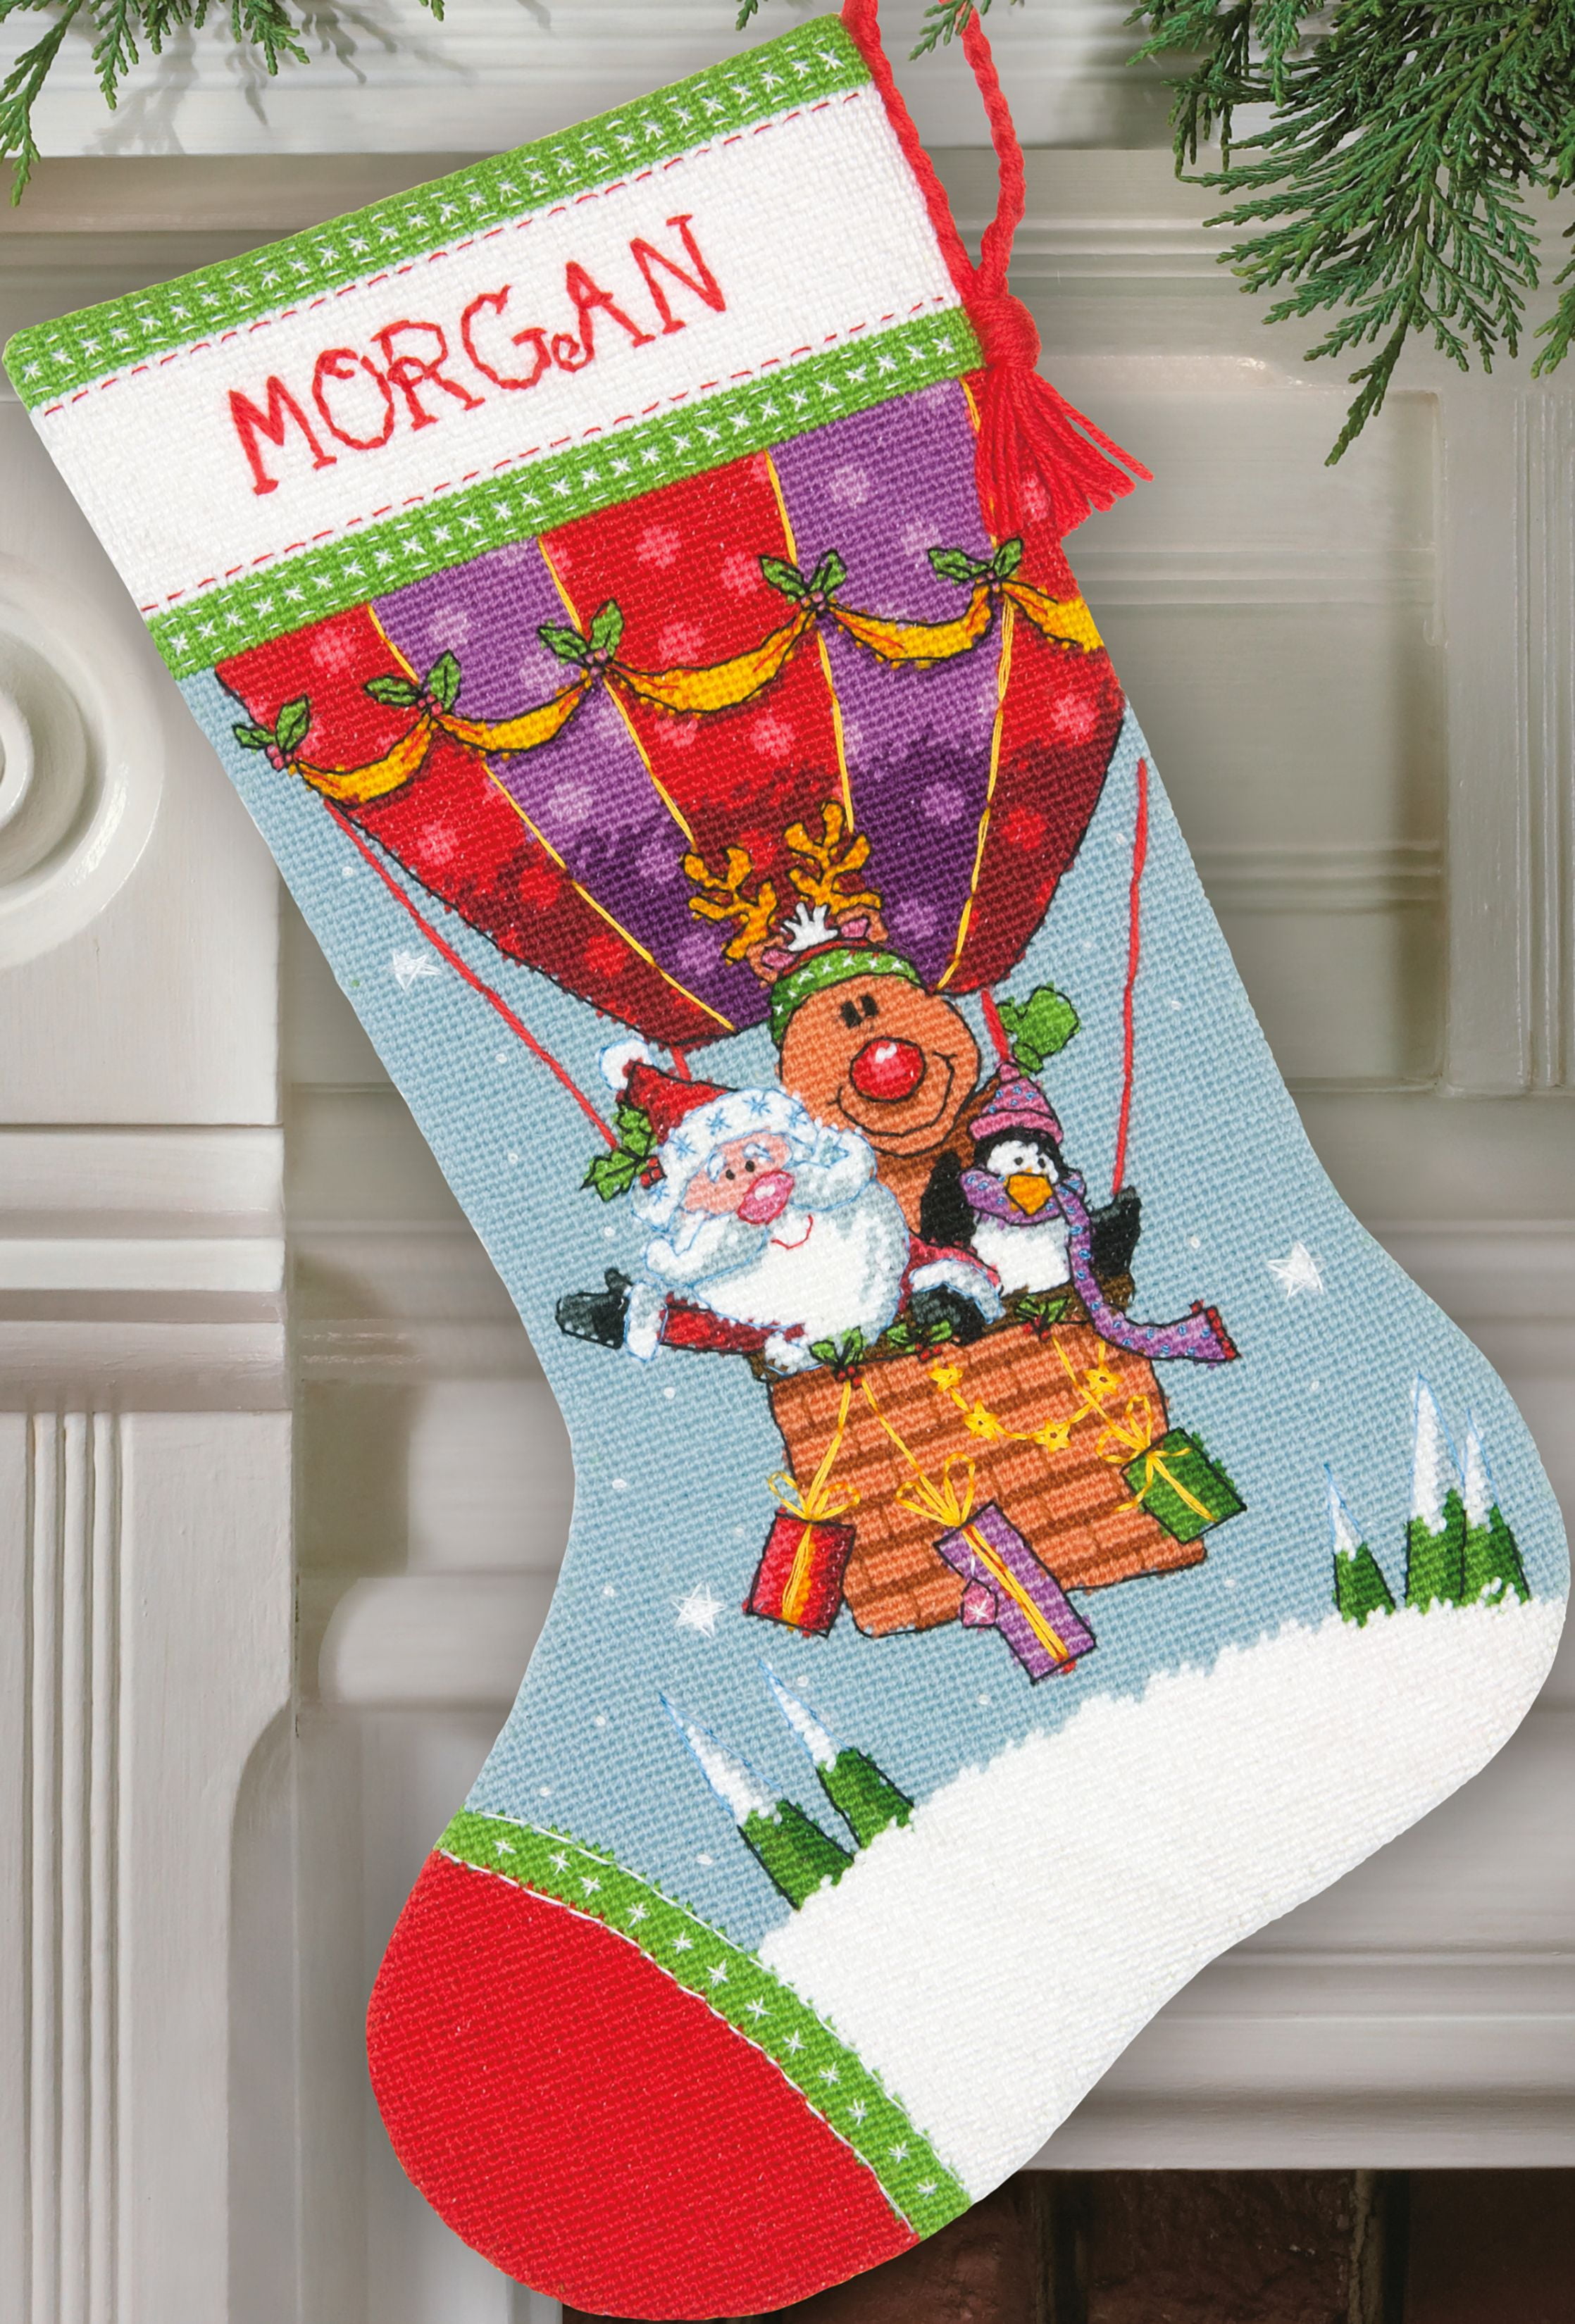 VINTAGE wool NEEDLEPOINT CHRISTMAS STOCKINGS  CHOICE OF 5 MOTIFS NEW SEE PICS 